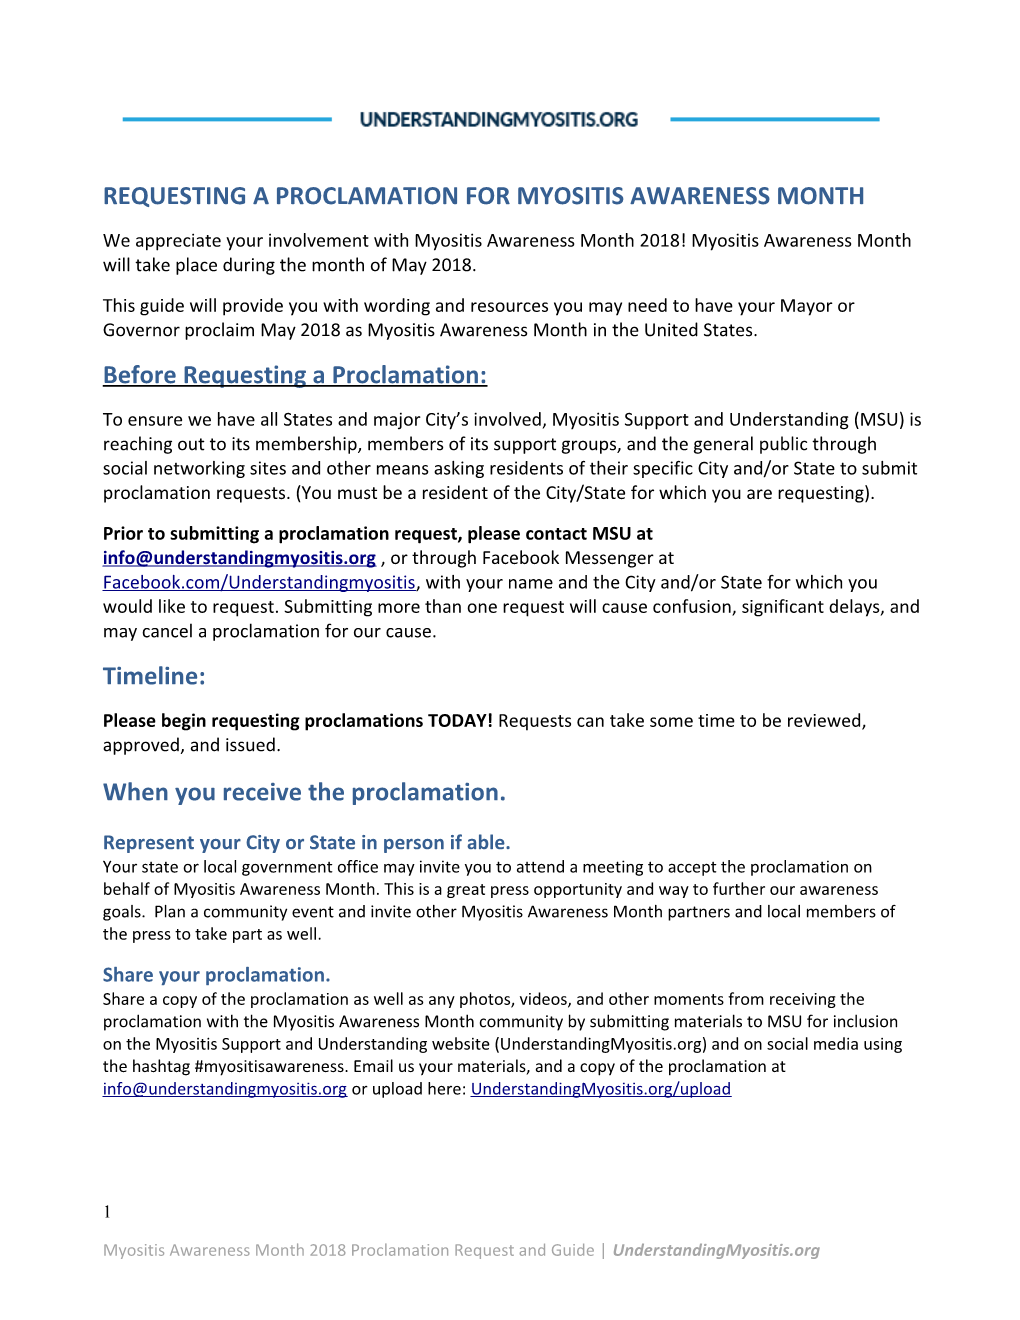 Requesting a Proclamation for Myositis Awareness Month